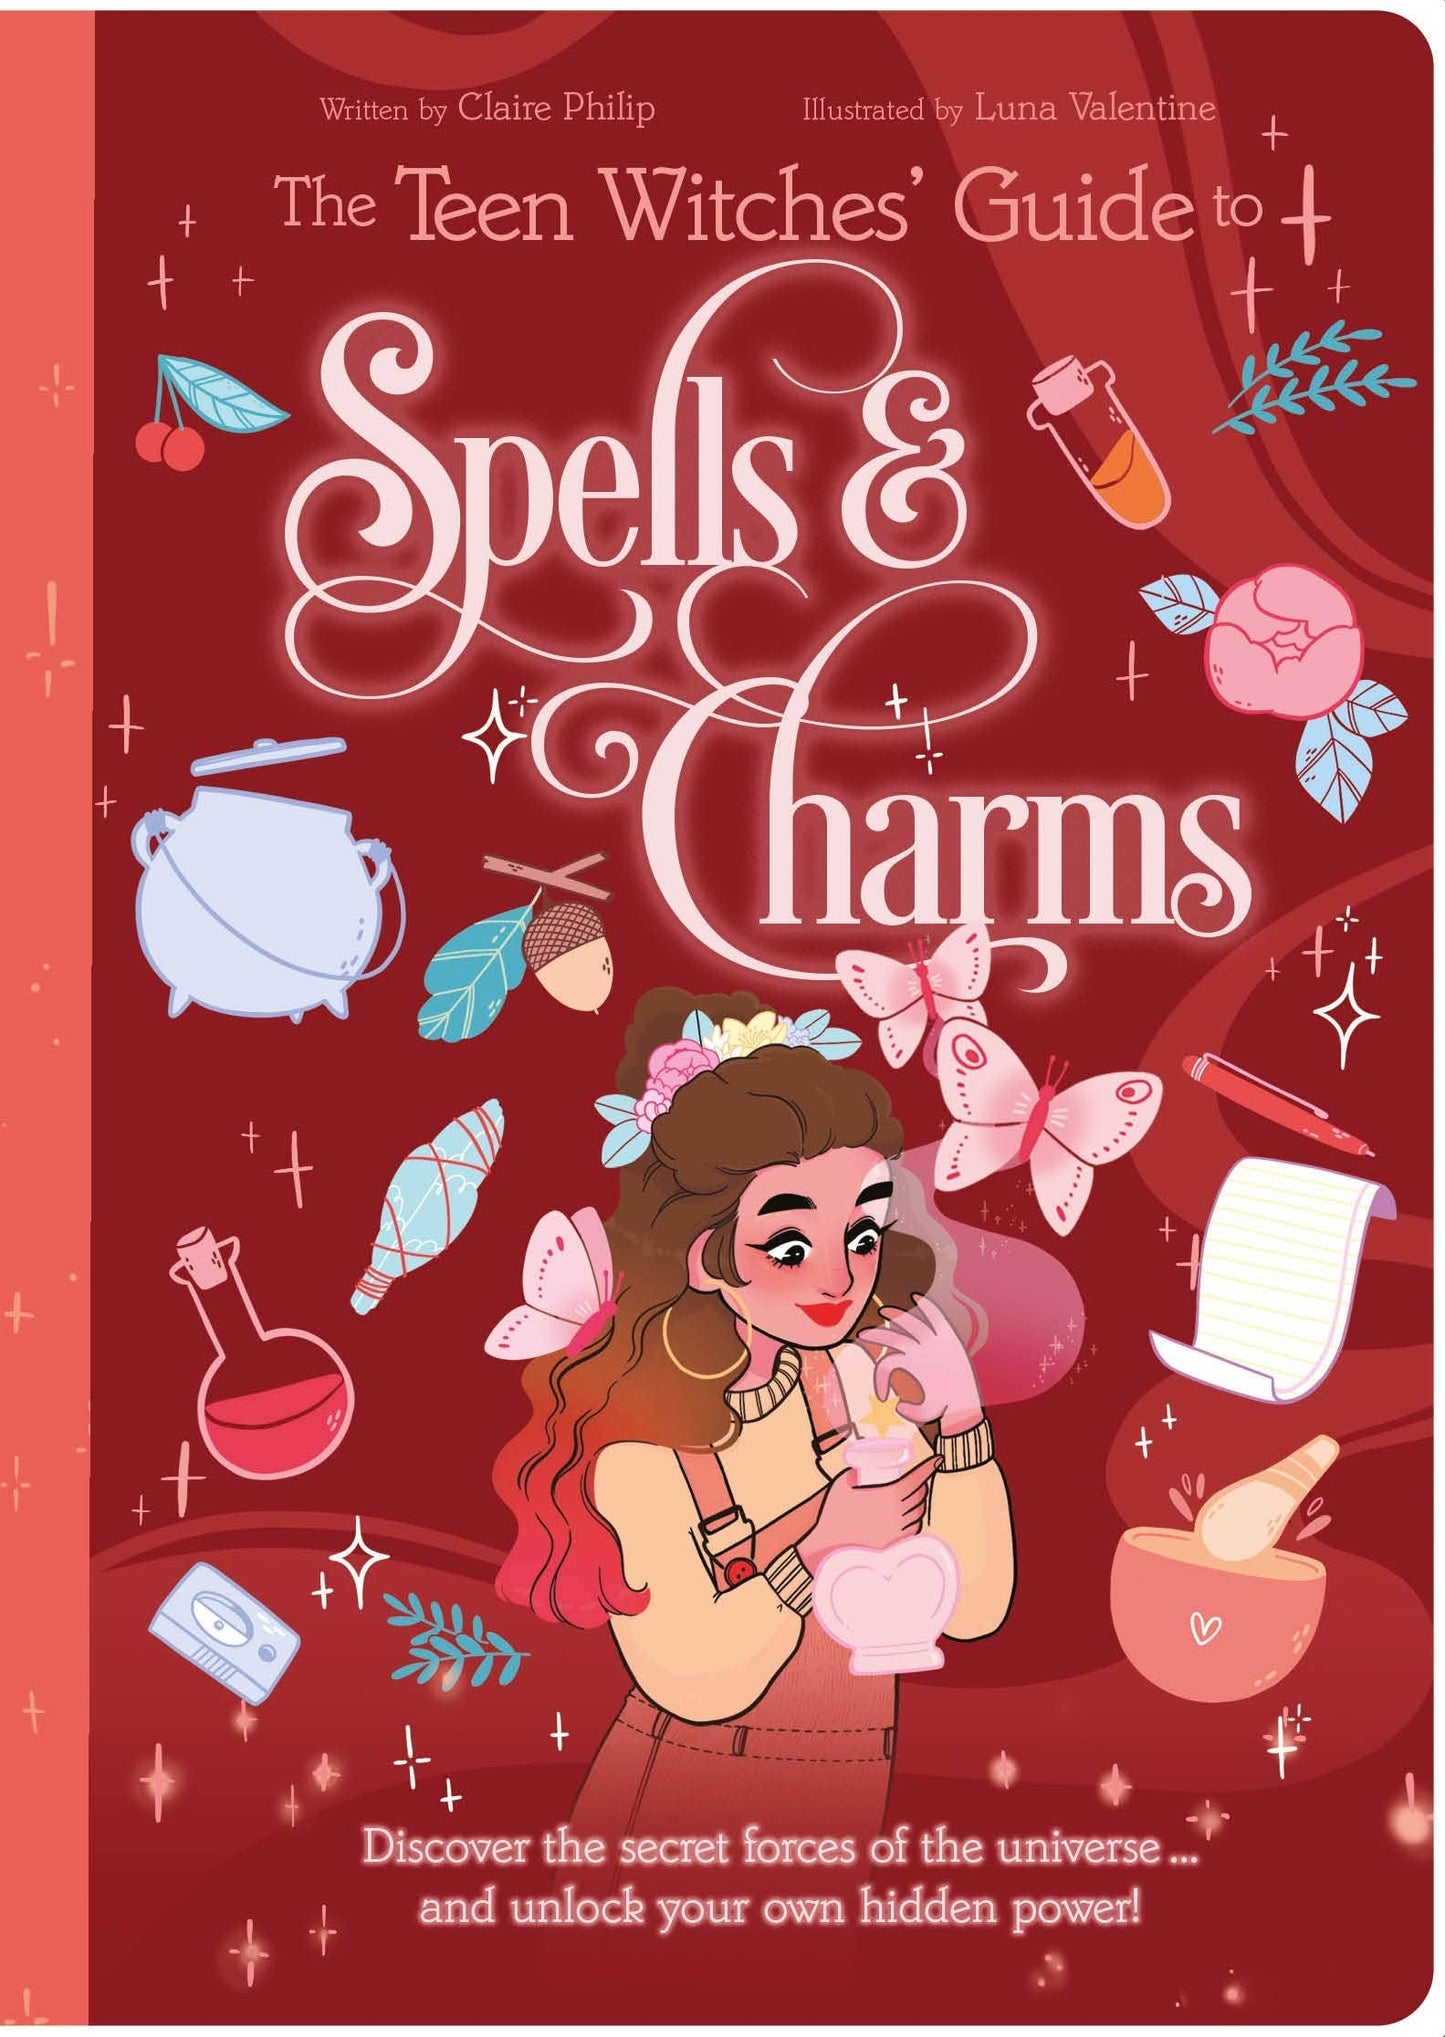 Teen Witches' Guide To Spells & Charms (Book 7)